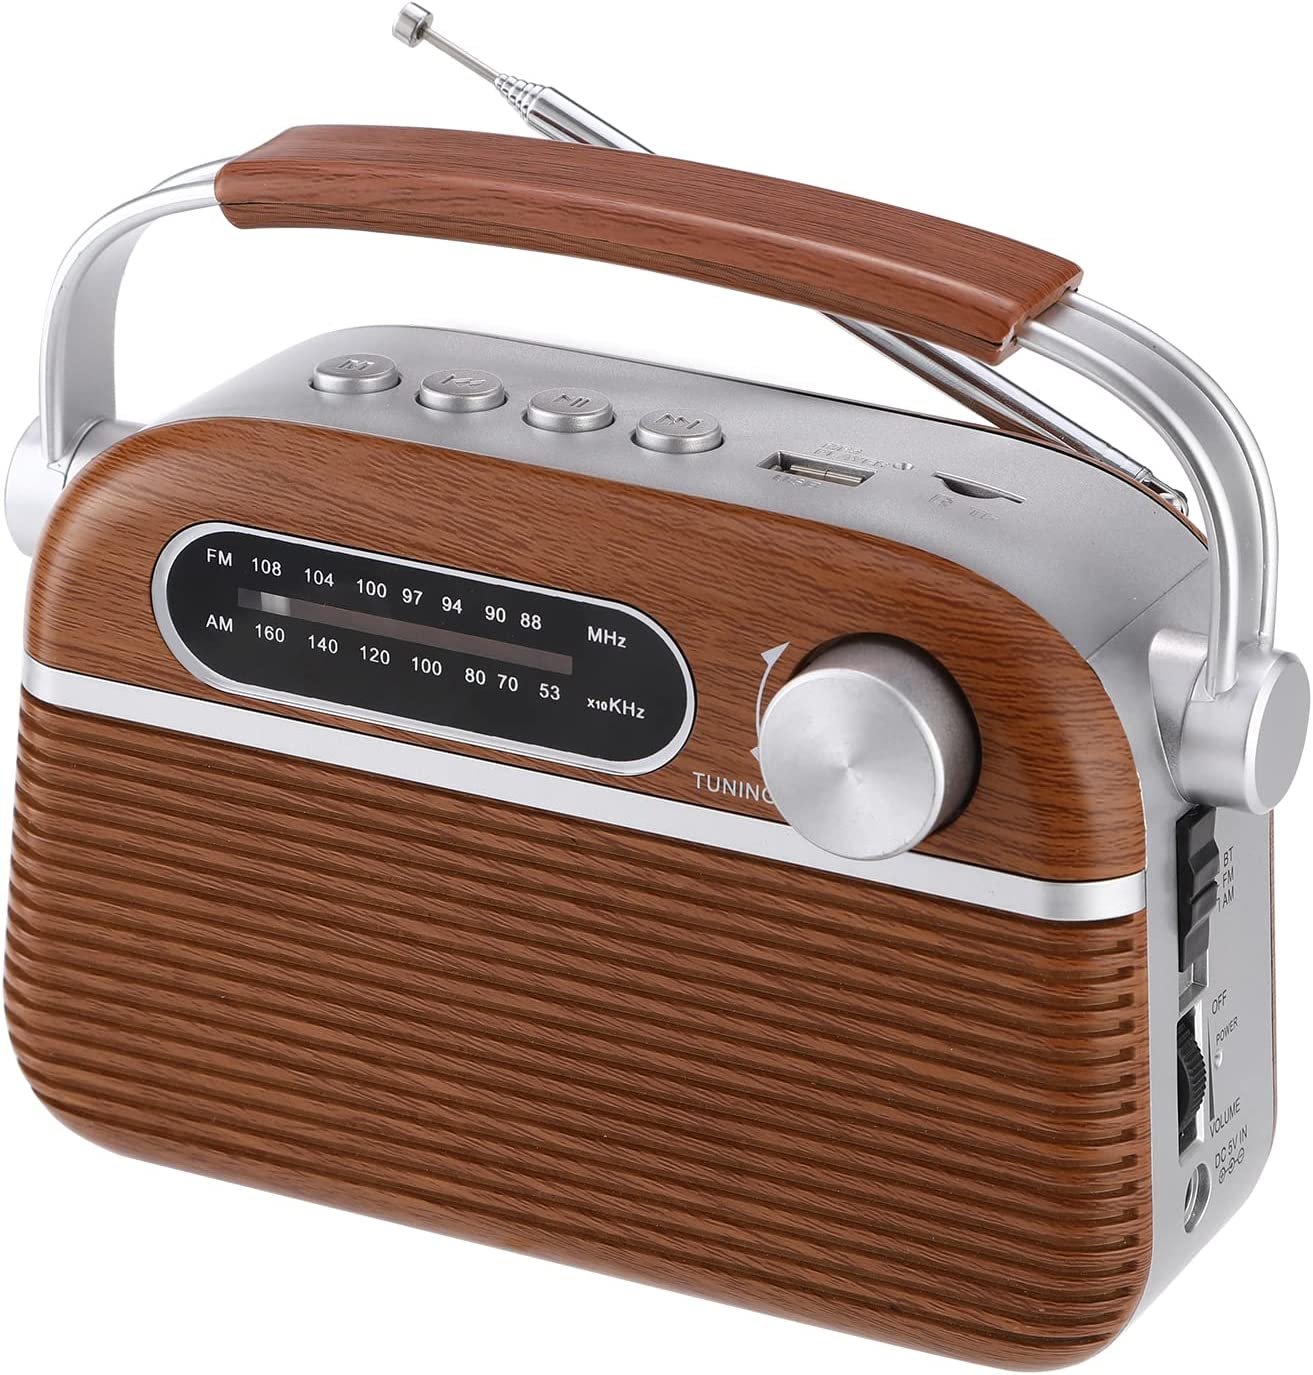 Portable Retro AM FM Radio Bluetooth Speak, USB and Micro SD Card MP3 Player, Battery Operated Analog Radio Or AC Power Vintage Transistor Radio with Big Speaker for Home and Outdoor